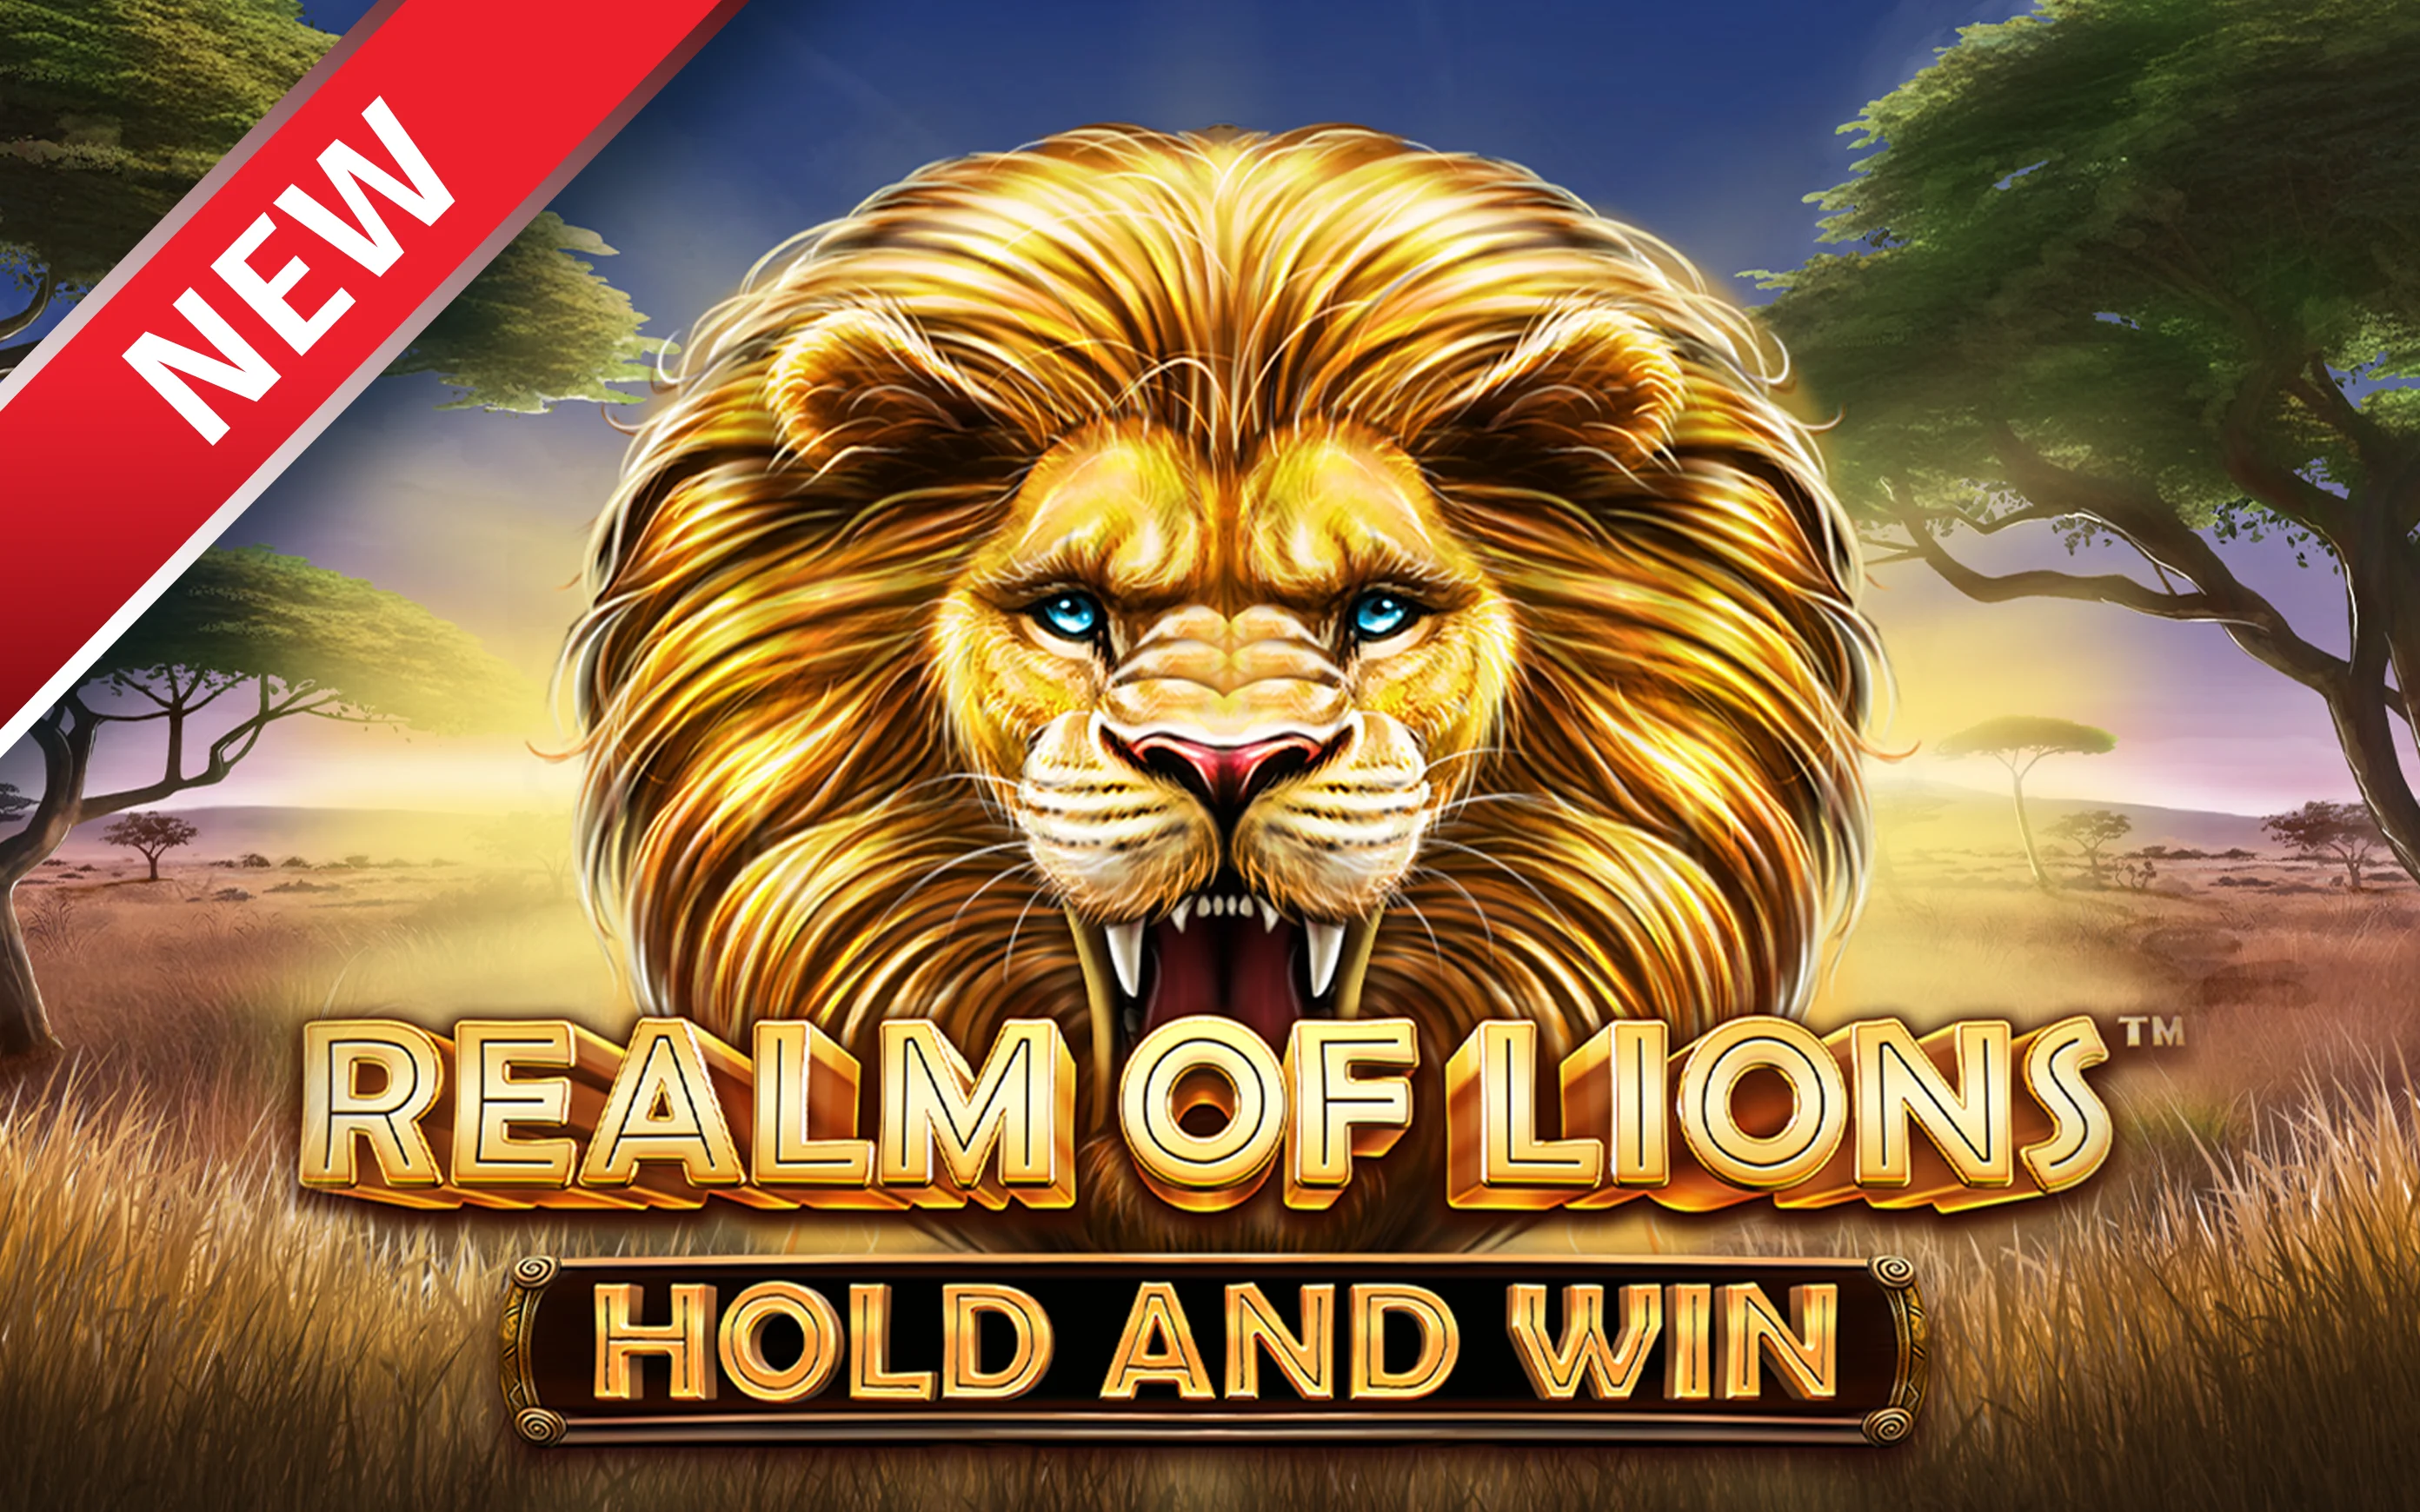 Play Realm of Lions on Starcasino.be online casino